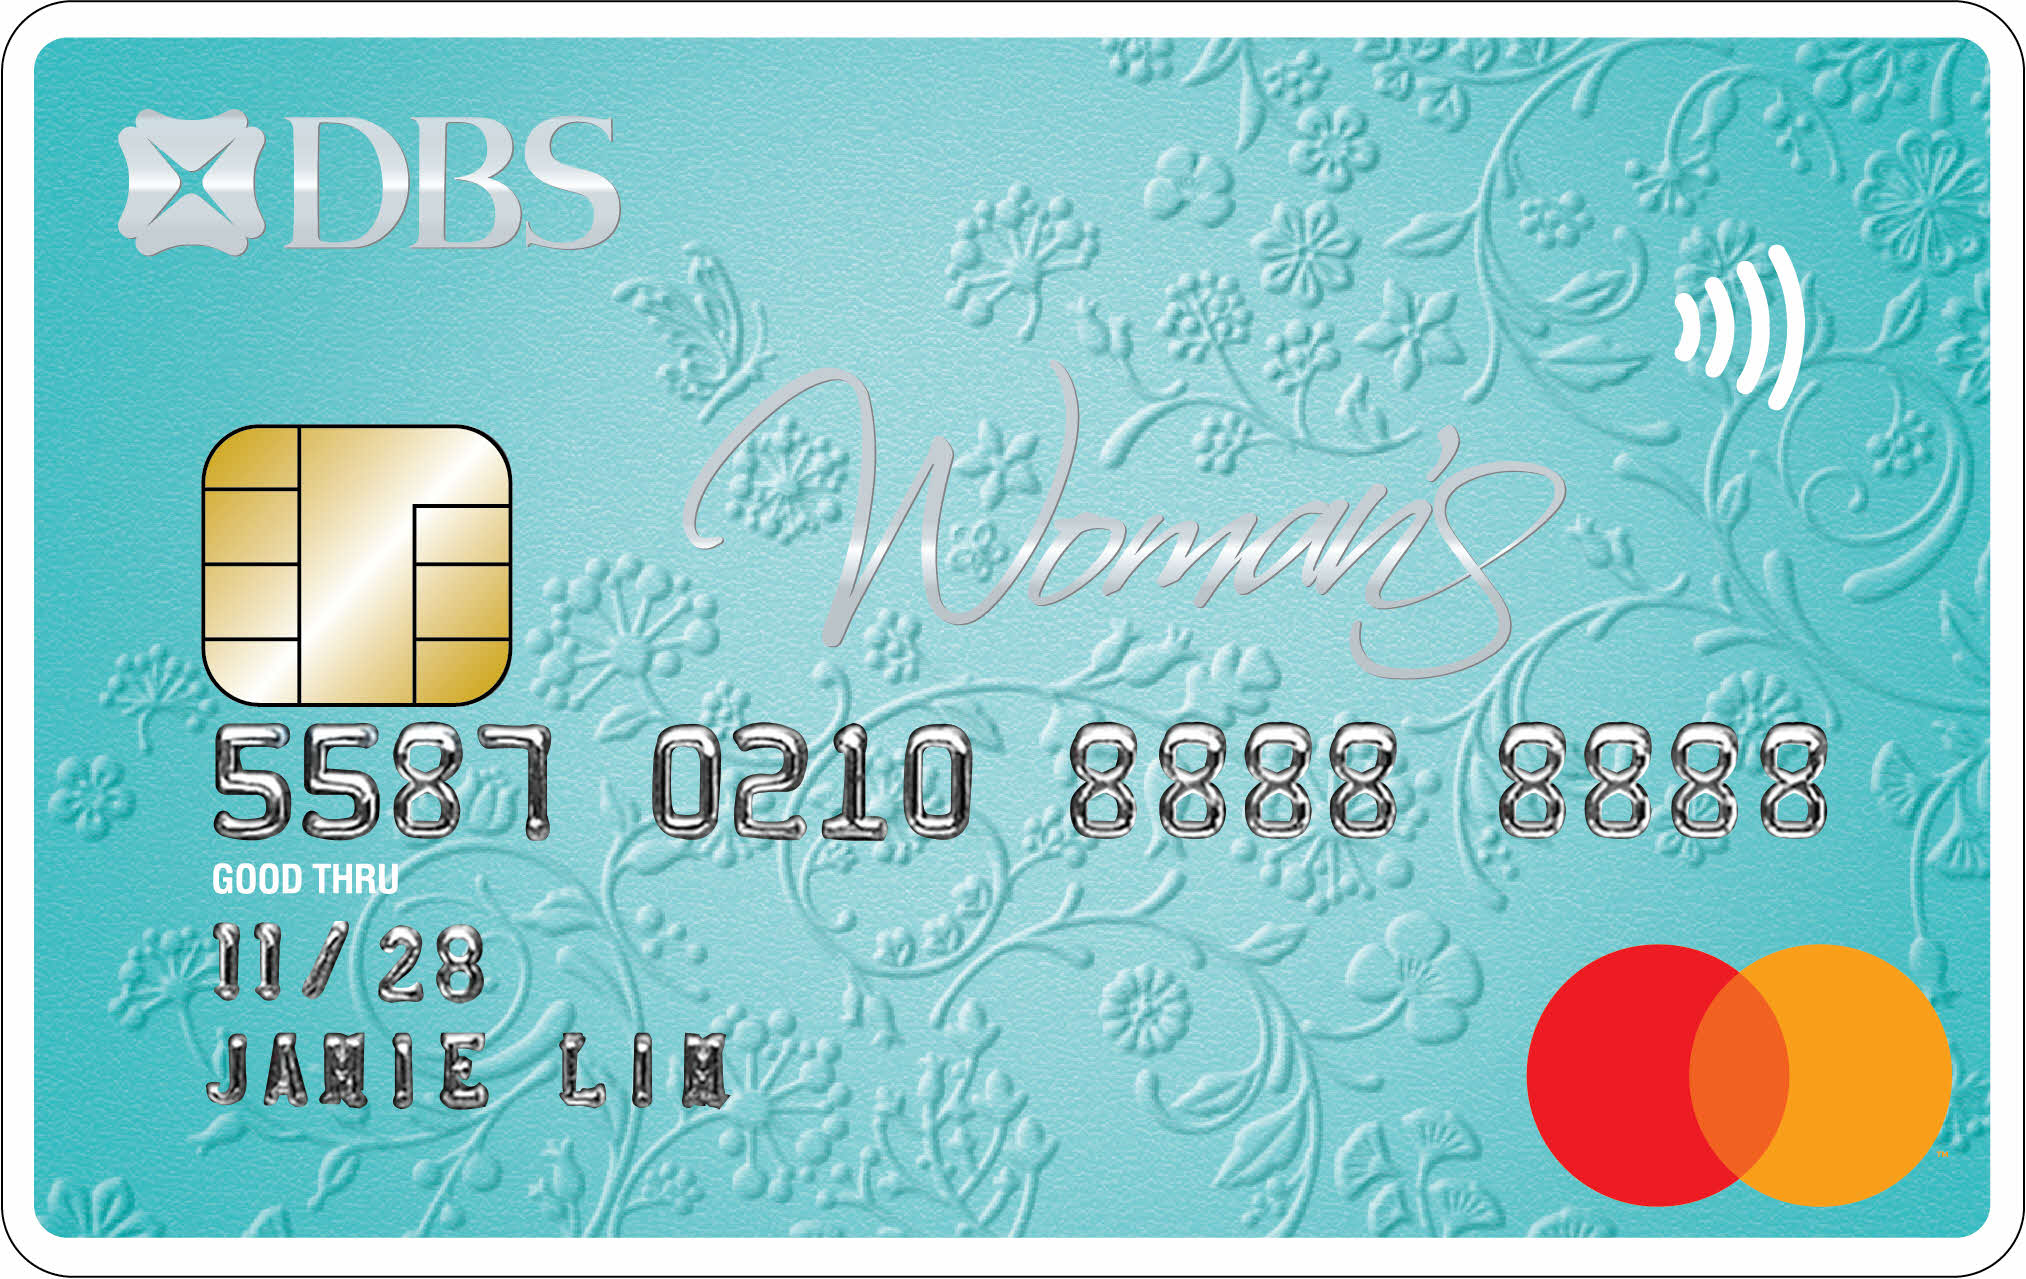 Review: DBS Woman’s World Card Singapore